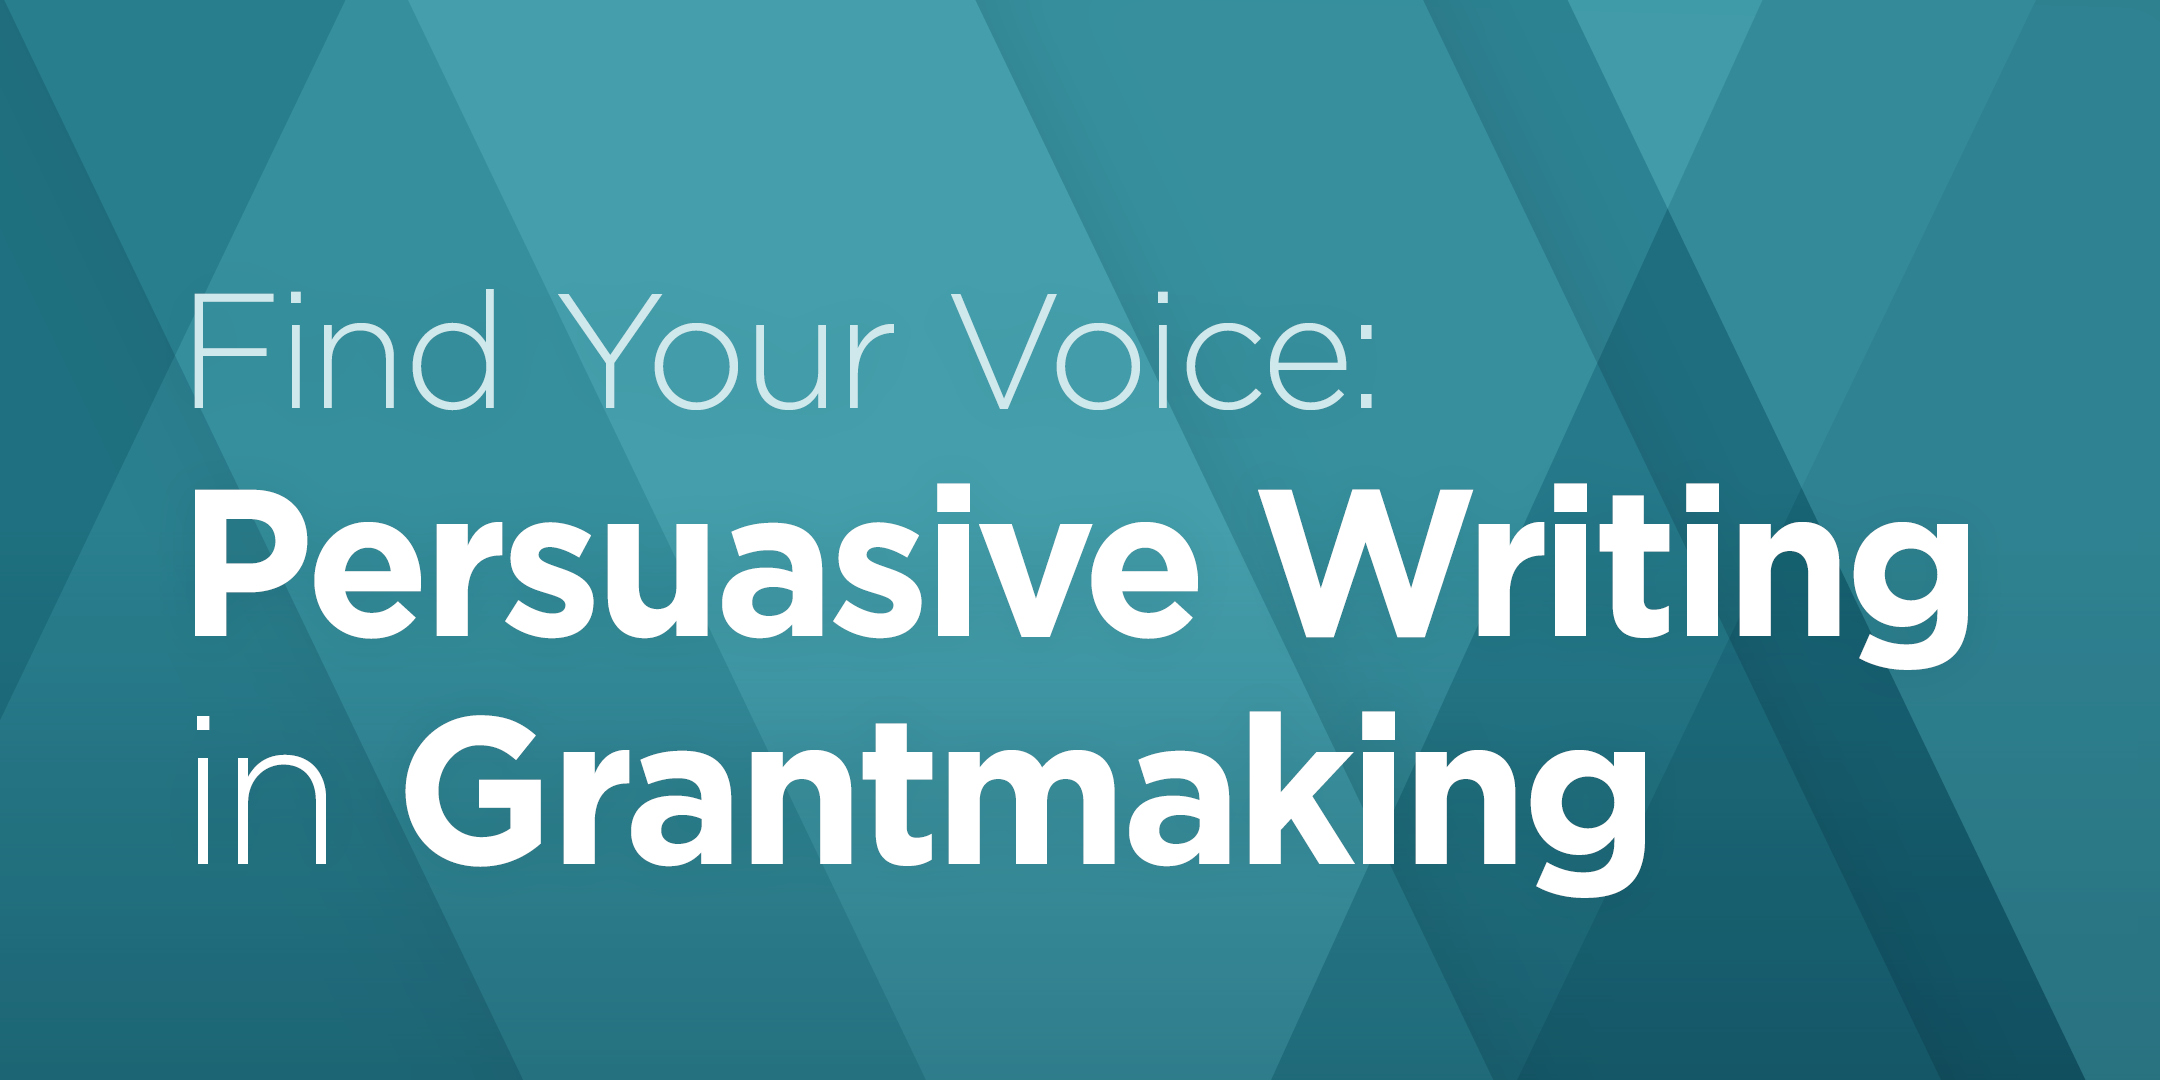 Find Your Voice: Persuasive Writing in Grantmaking